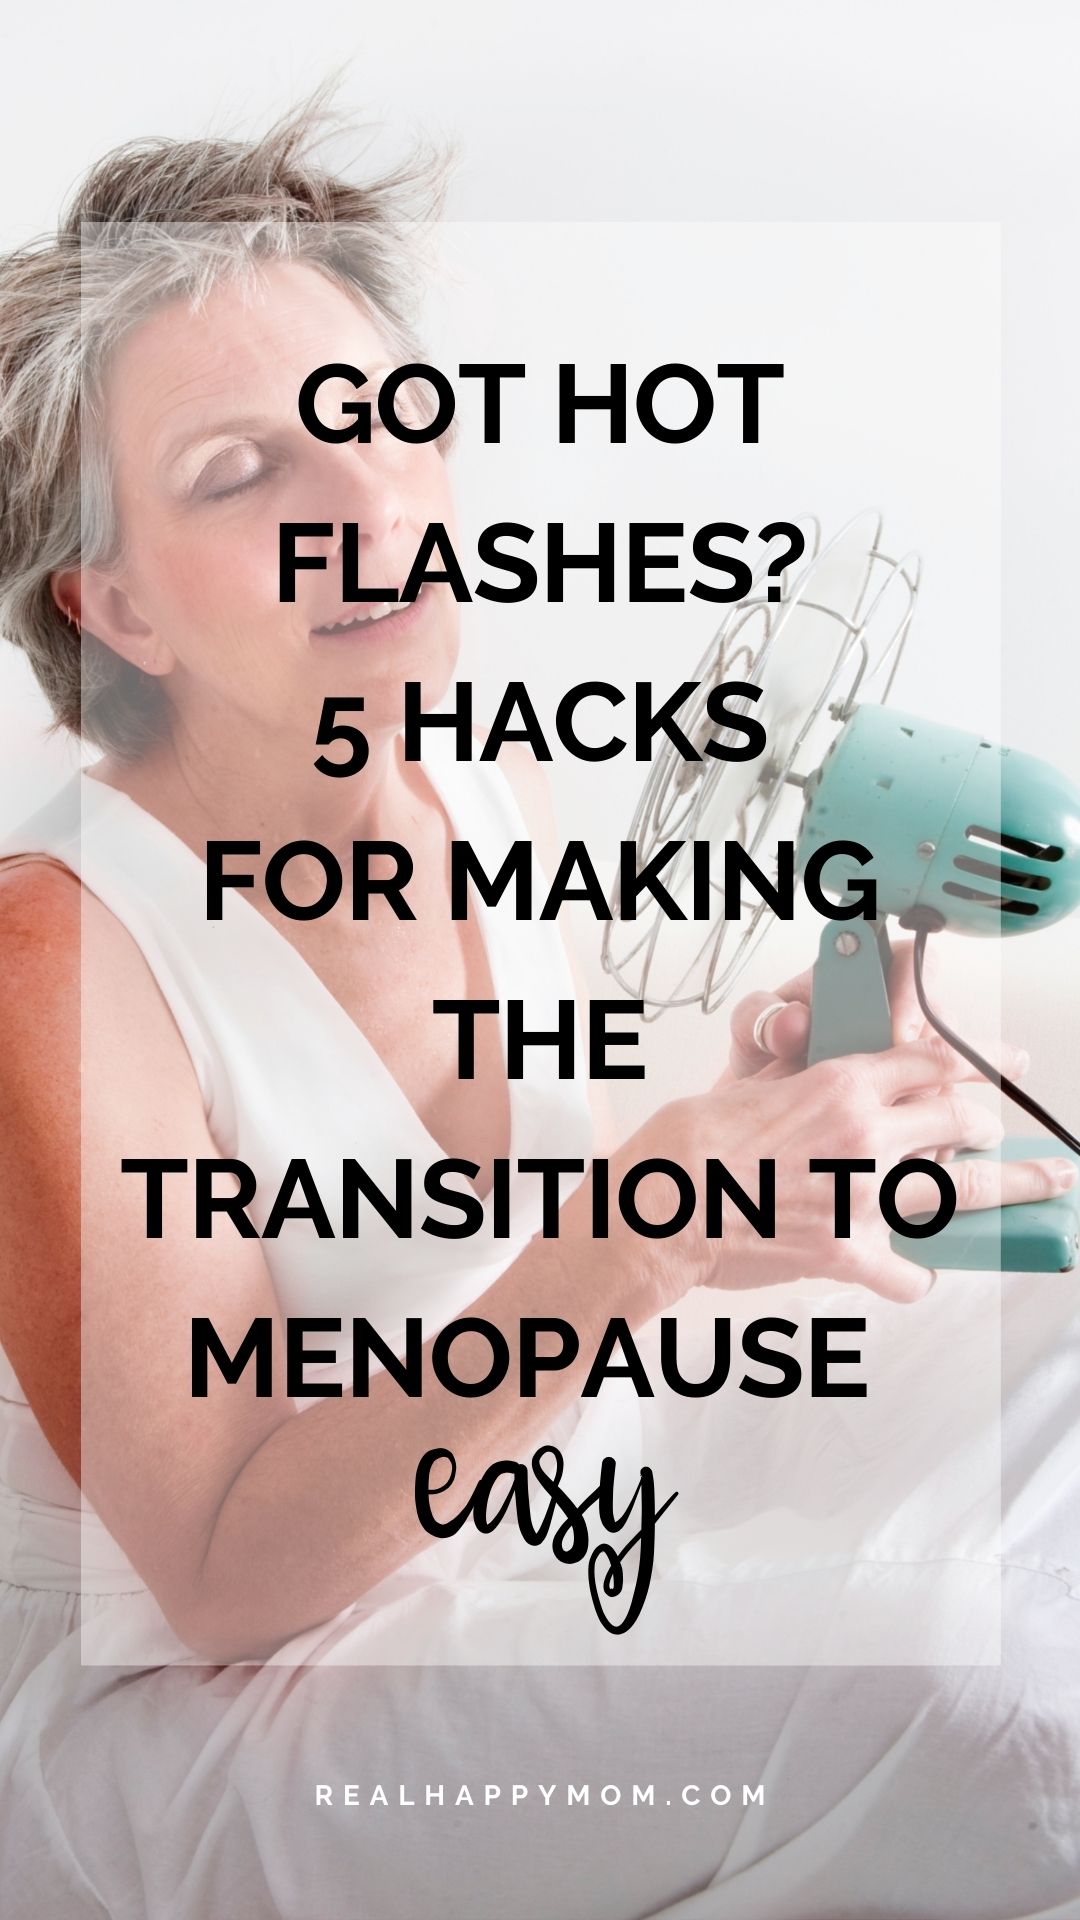 Got Hot Flashes? 5 Hacks For Making the Transition to Menopause Easy